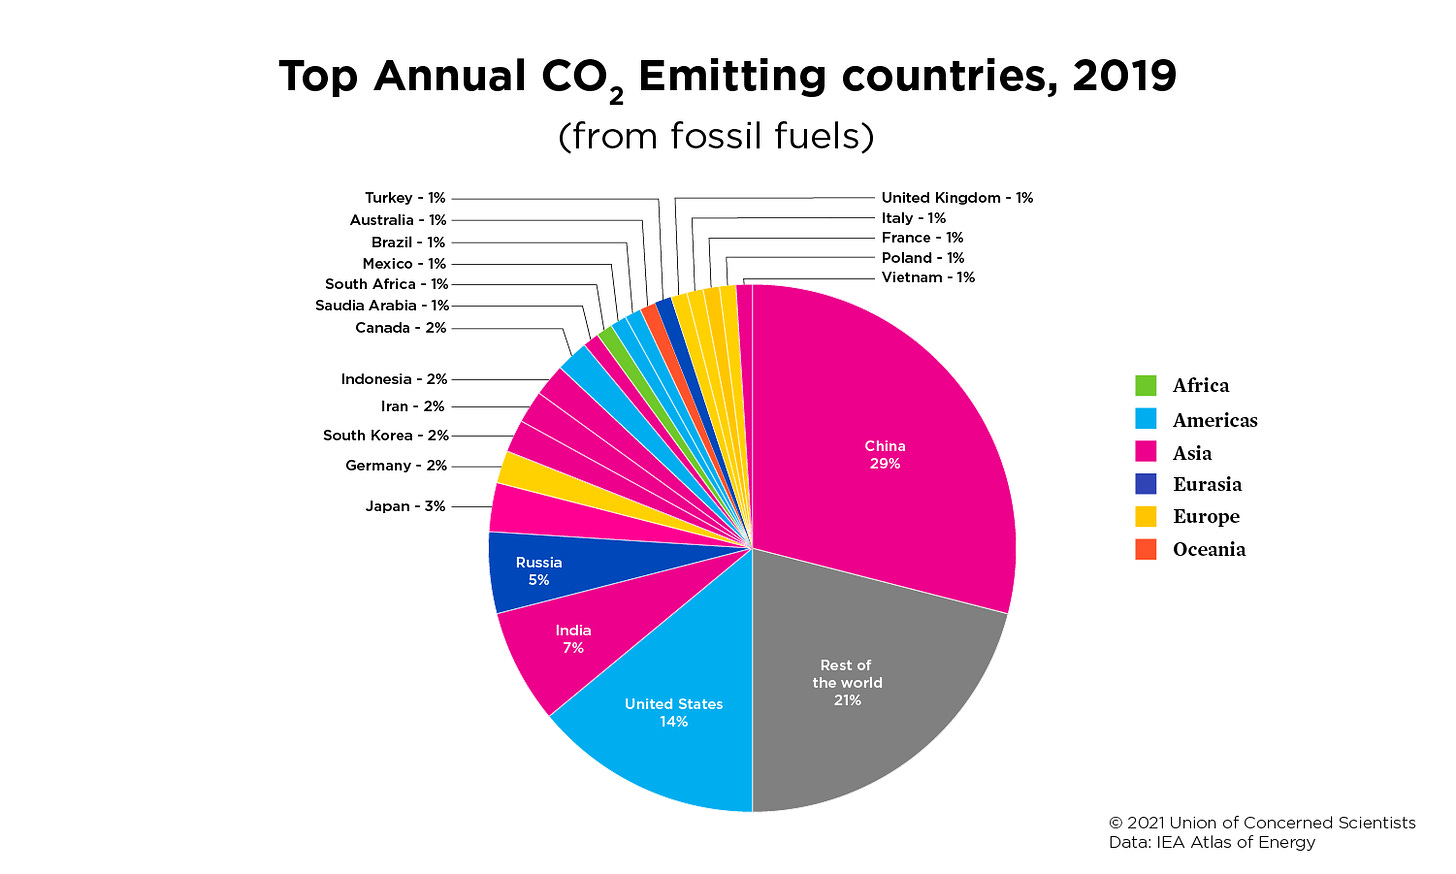 A pie chart showing the top annual CO2 emitting countries in 2019